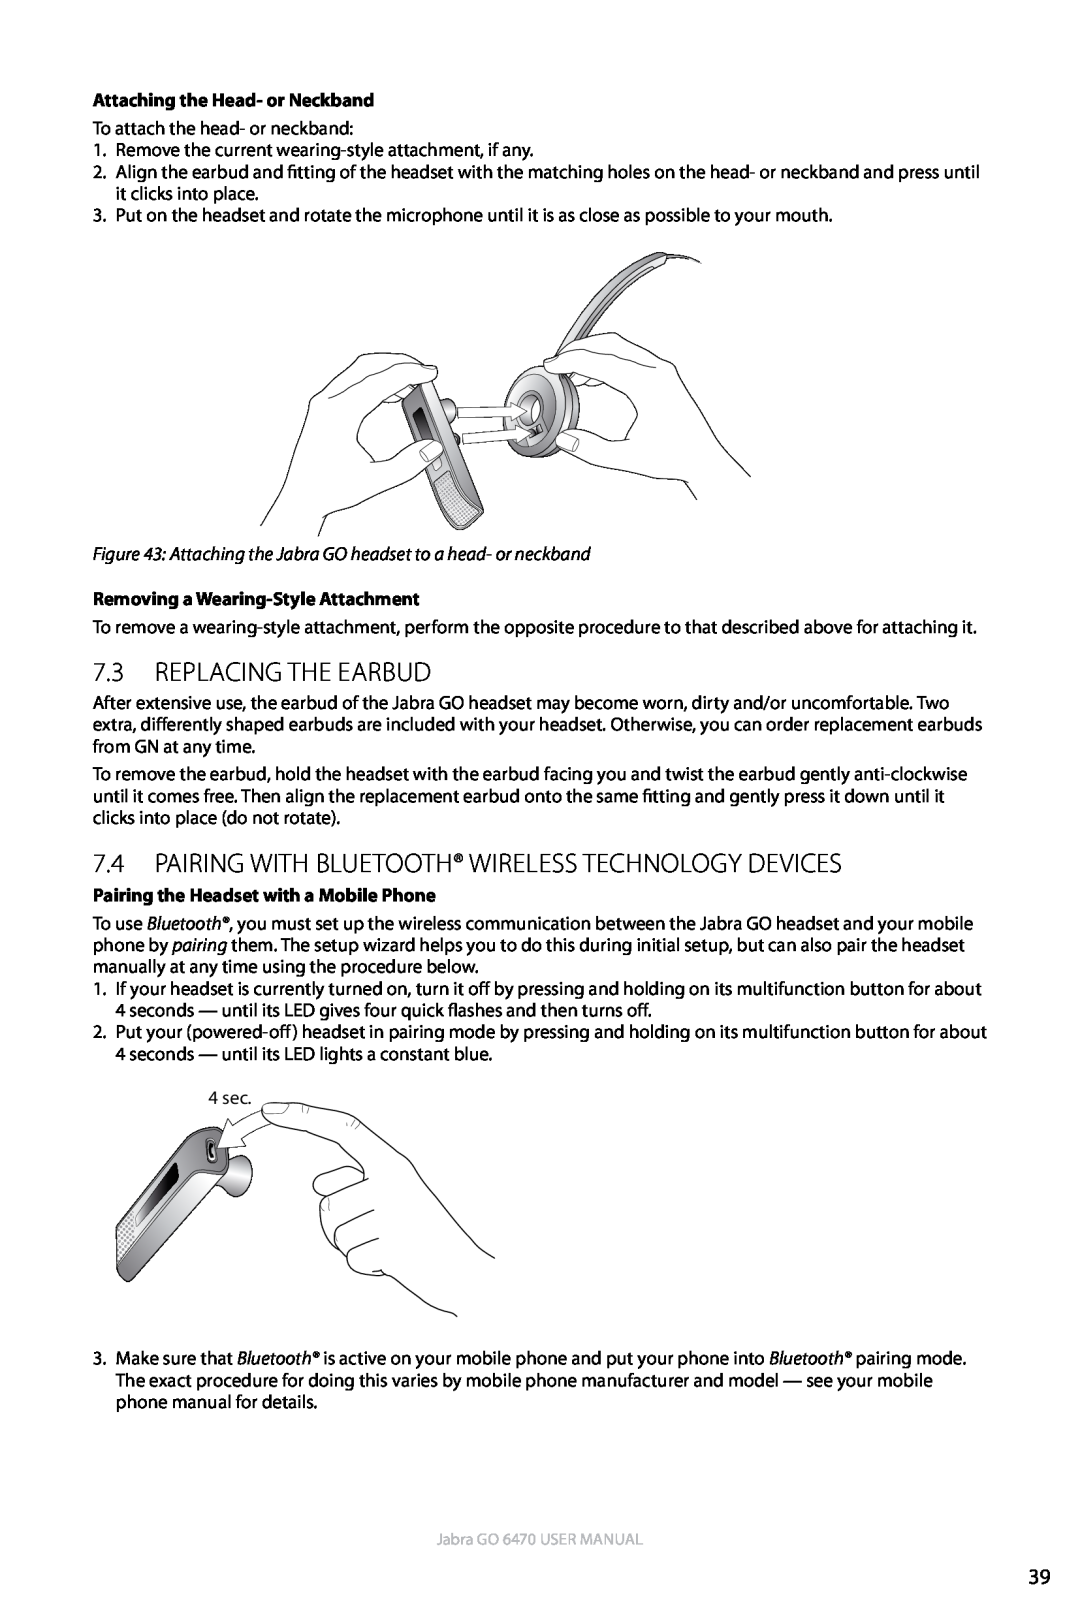 Jabra GO 6470 user manual 7.3Replacing the Earbud, Attaching the Head- or Neckband, Removing a Wearing-StyleAttachment 